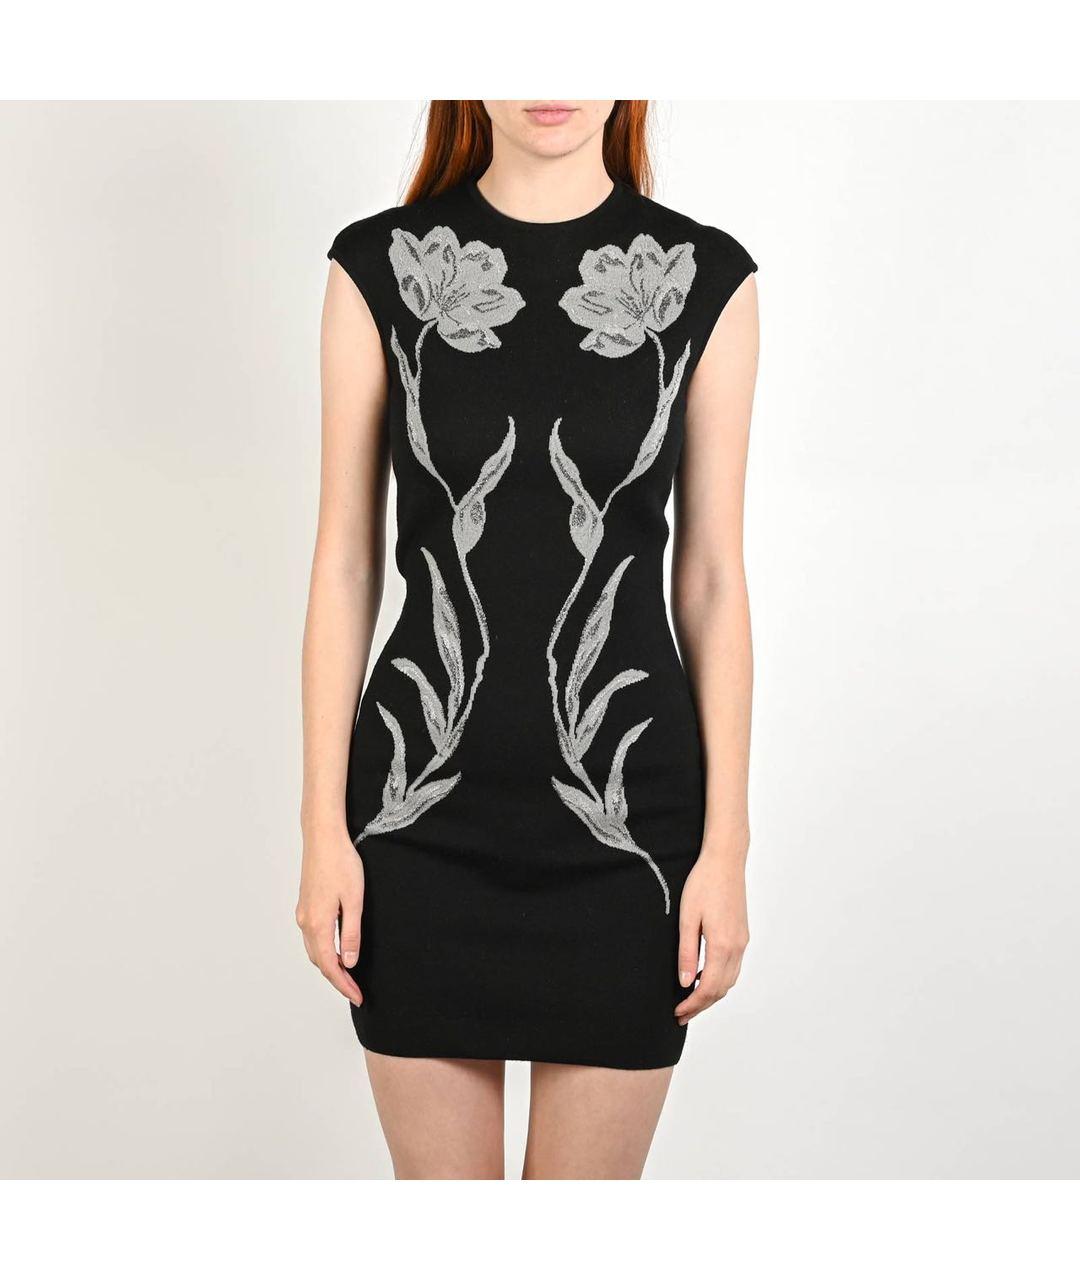 Alexander McQueen 

Black short embroidery dress

Content:63% wool, 20% polyamide, 2% elastane, 15% fibro metallization

IT Size 40 - 4

Excellent condition!
 
PLEASE VISIT OUR STORE FOR MORE GREAT ITEMS
OS
 